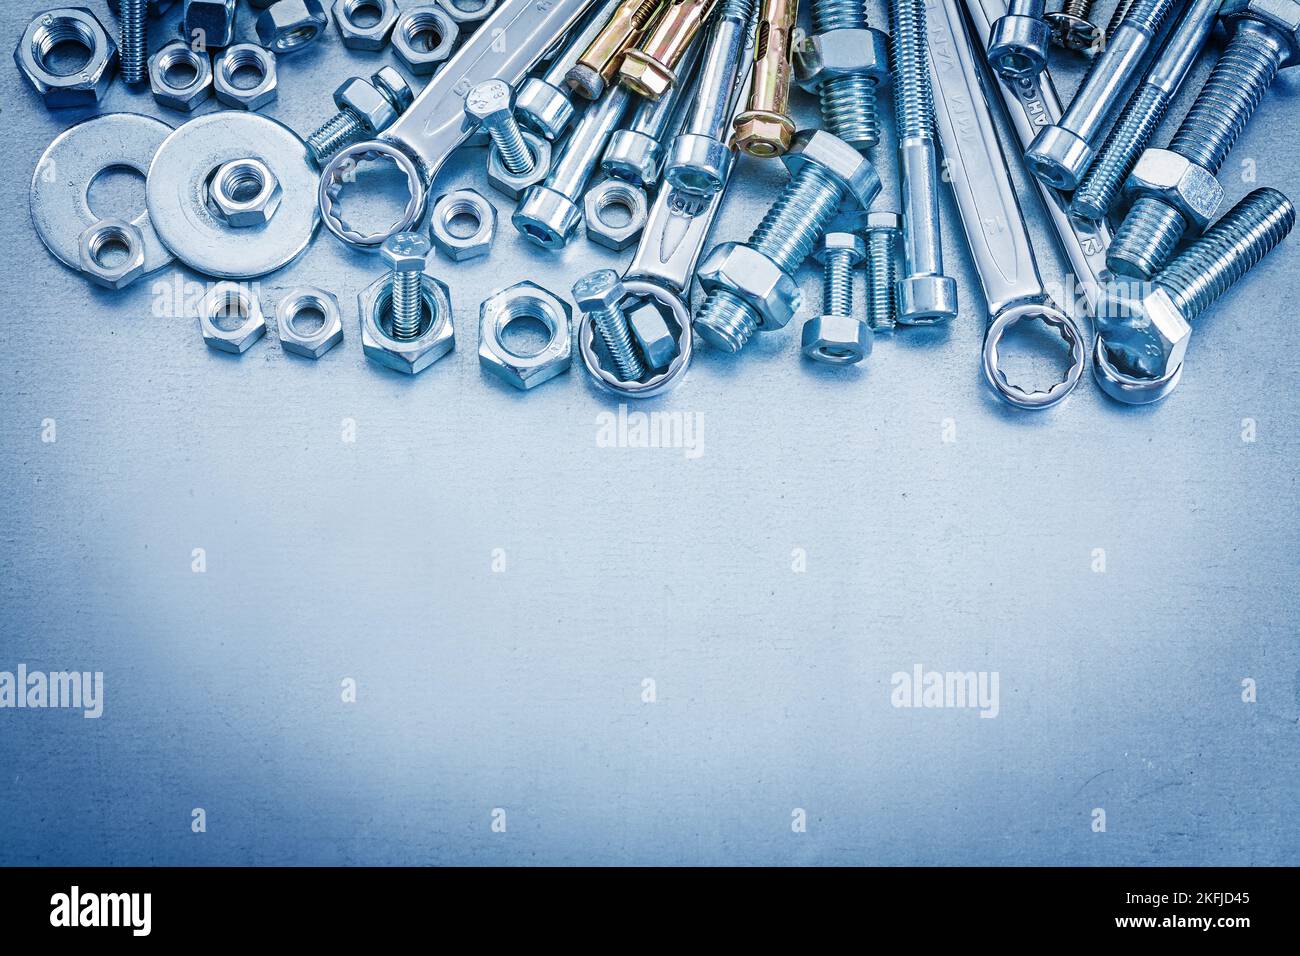 Anchor bolt washers screwbolts nuts and flat spanner on metallic background repairing concept. Stock Photo